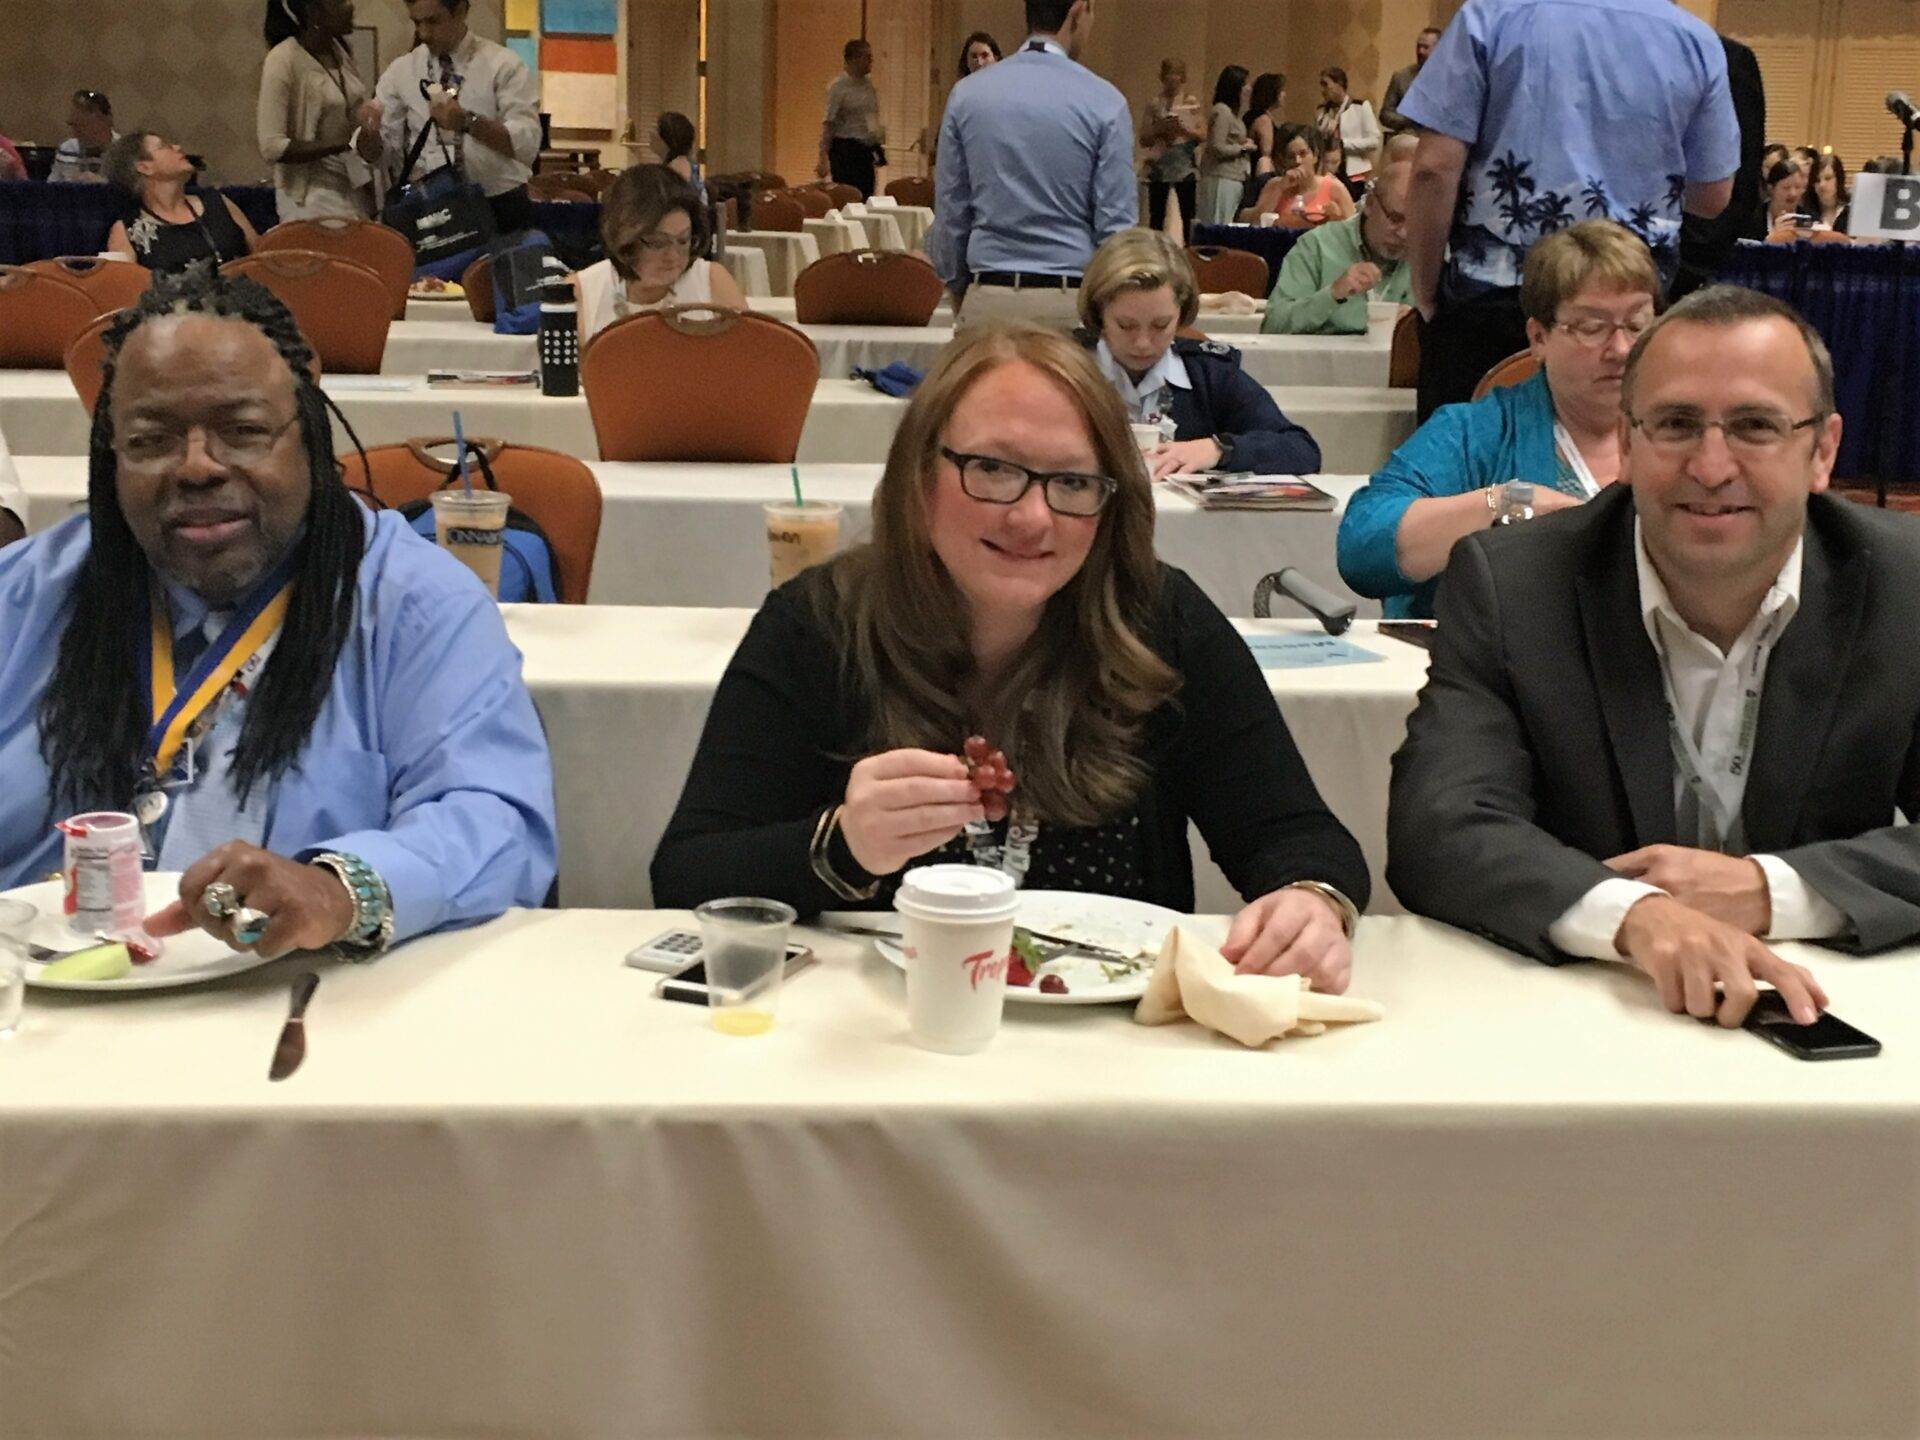 A group of people sitting at a table at a conference.